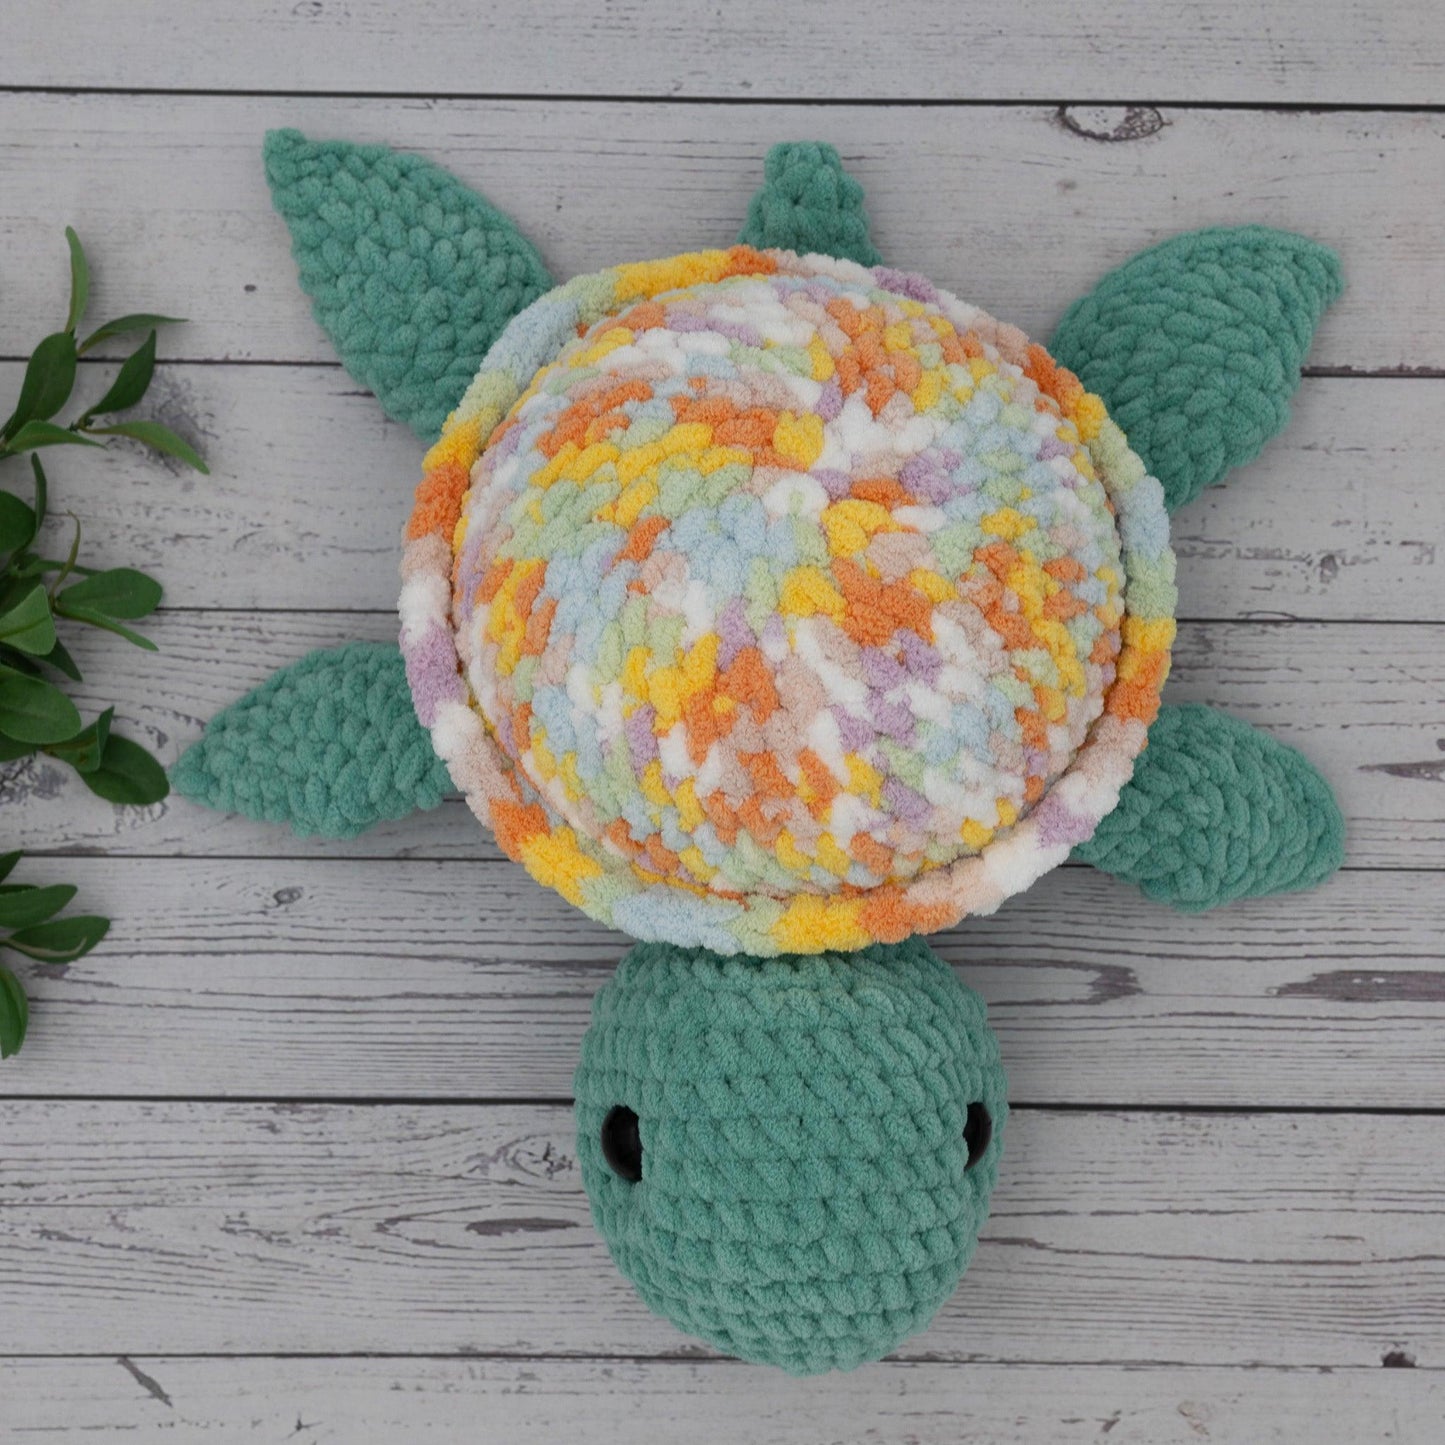 4Stitches Designs 18 Inch Crochet Sea Turtle Plush Toy - Hand-Made Stuffed Animal Gift for Kids